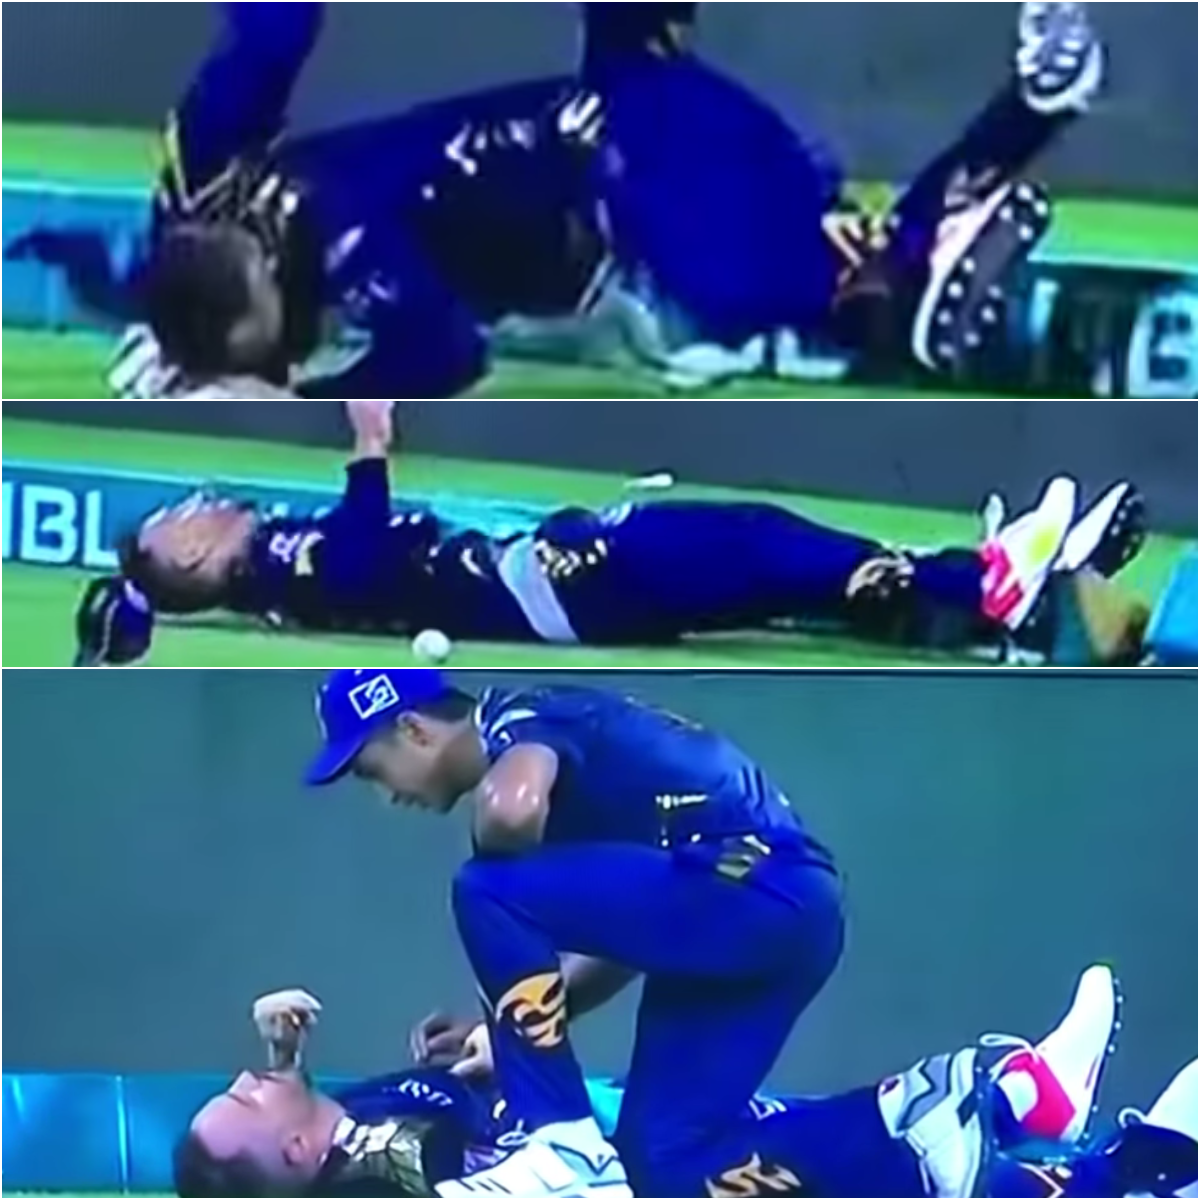 Faf du Plessis had suffered a serious concussion during PSL in Abu Dhabi | Twitter